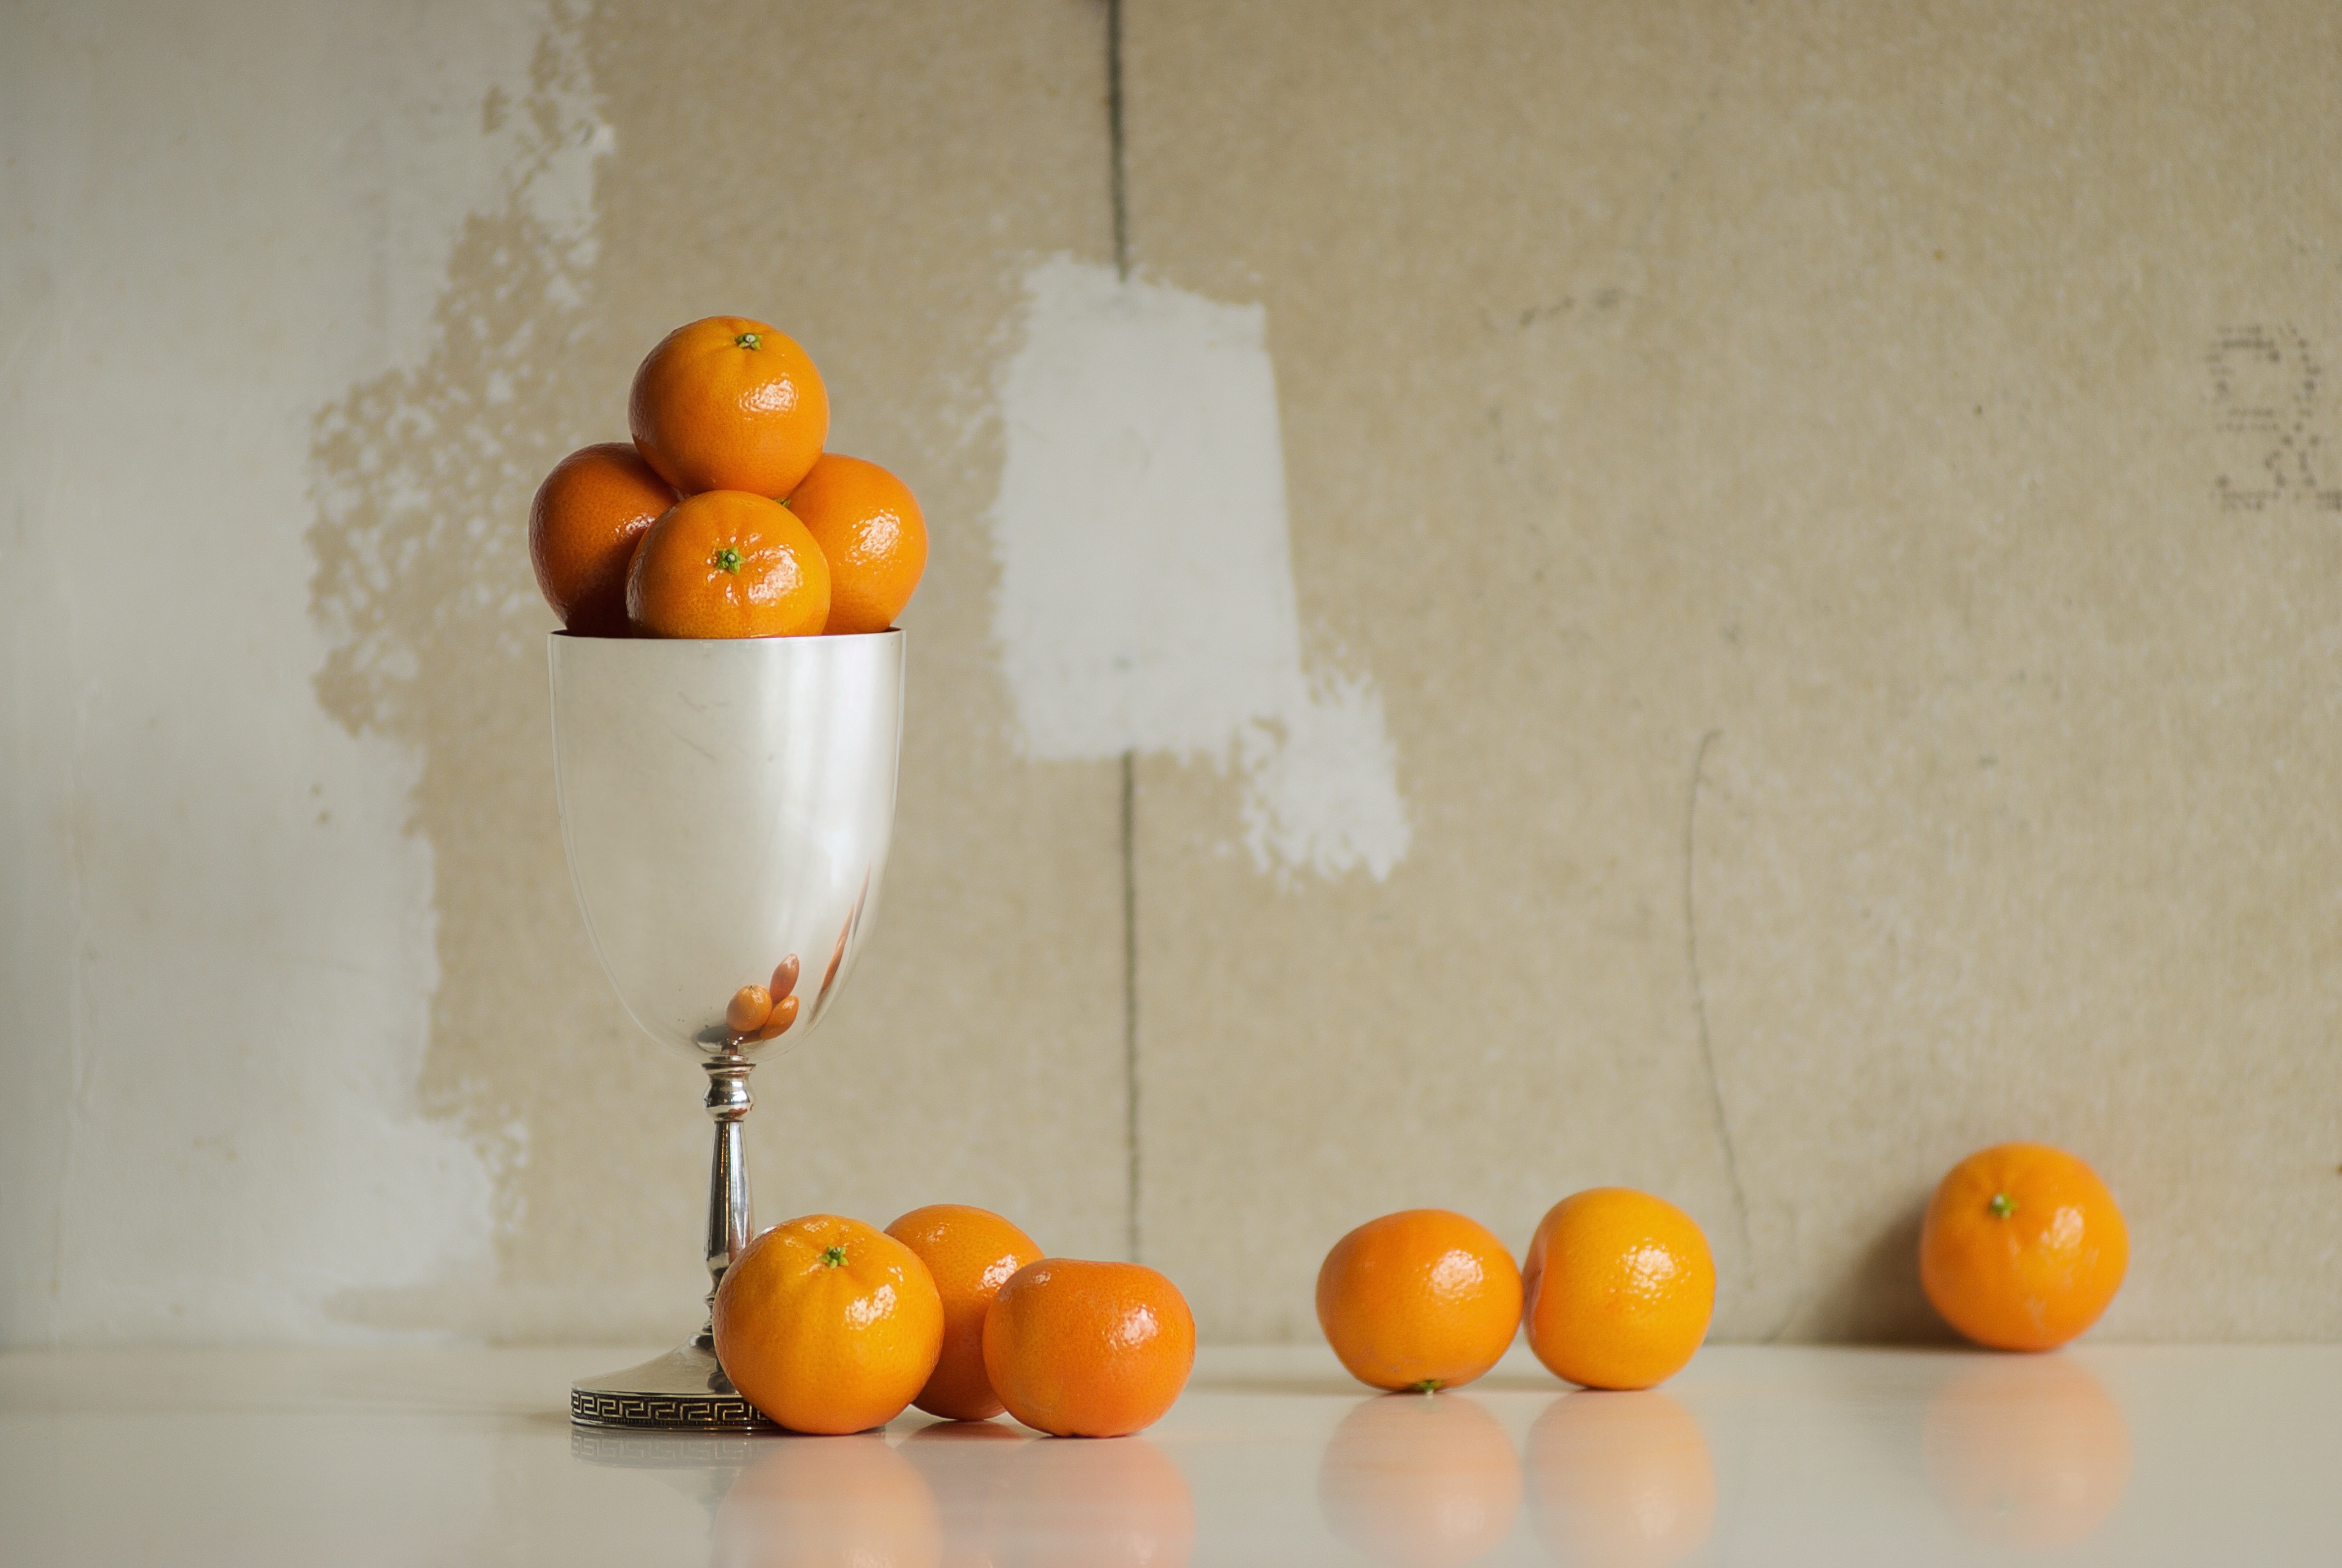 Still life art. Photograph of oranges in a silver goblet against a neutral background in window light.